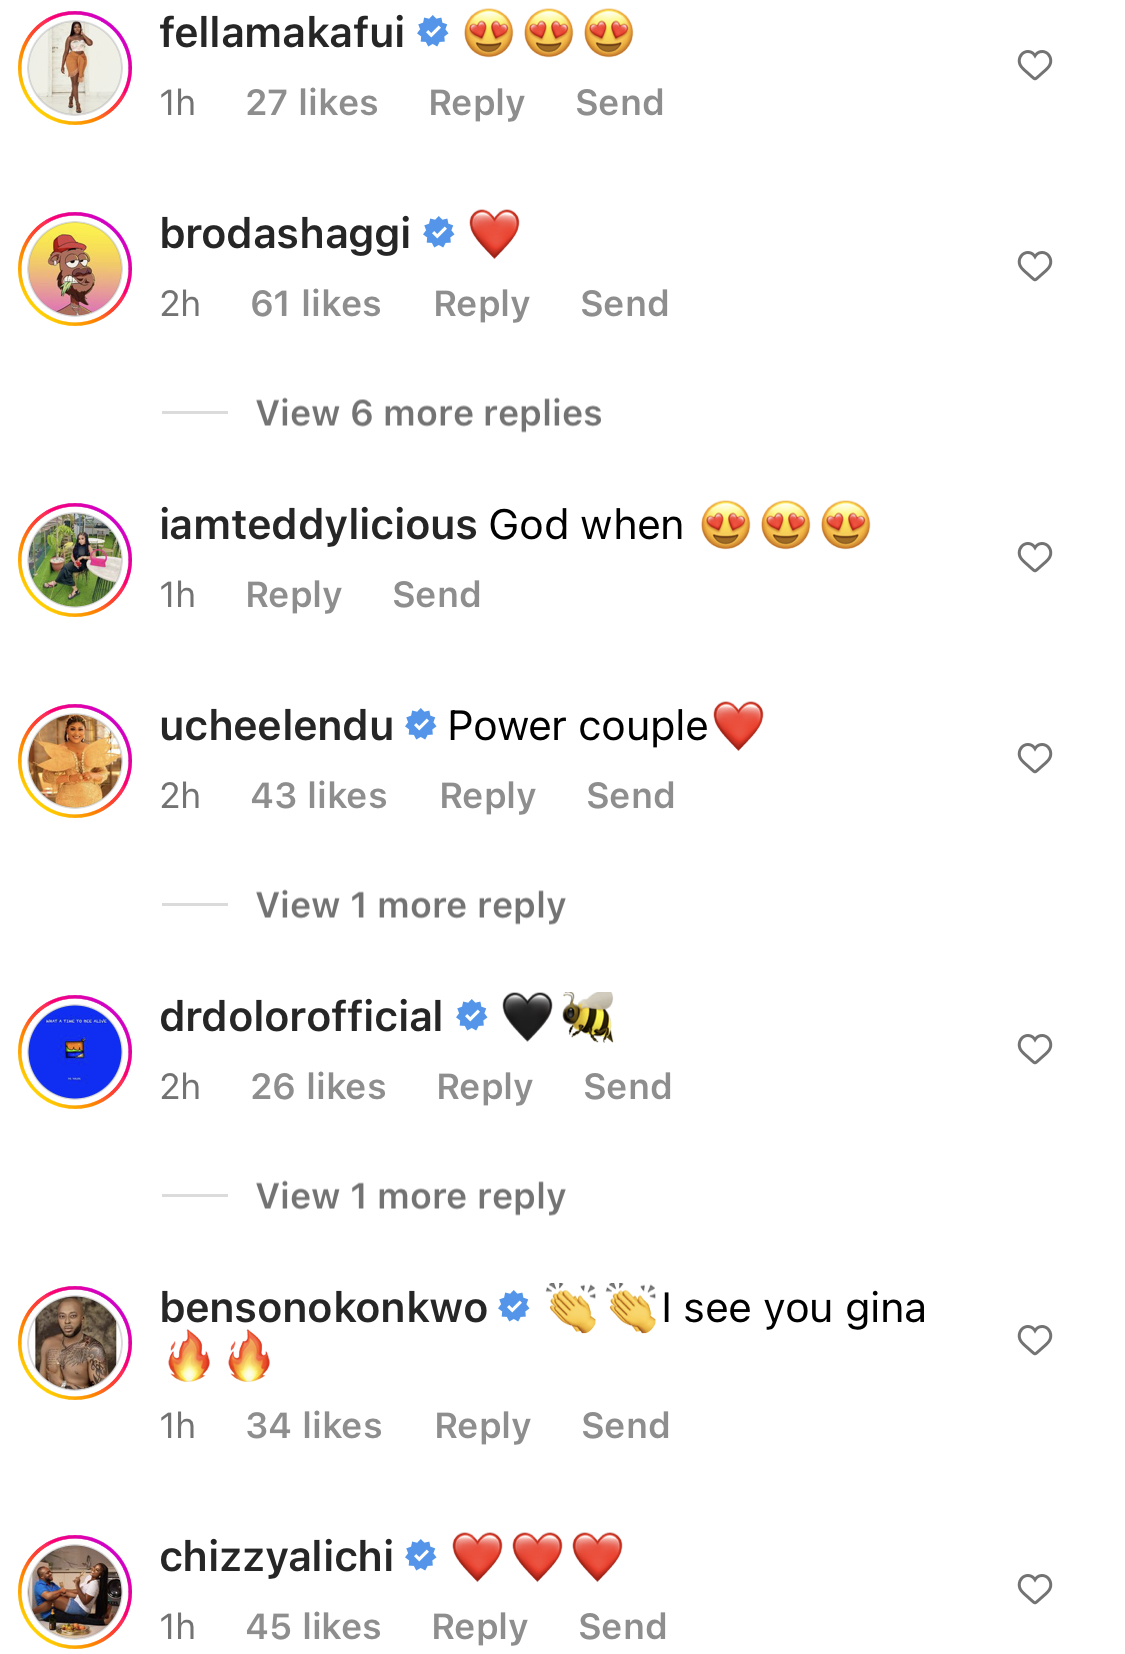 You always make me feel like a Princess and you’re funny - Regina Daniels gushes over billionaire hubby Ned Nwoko [video]